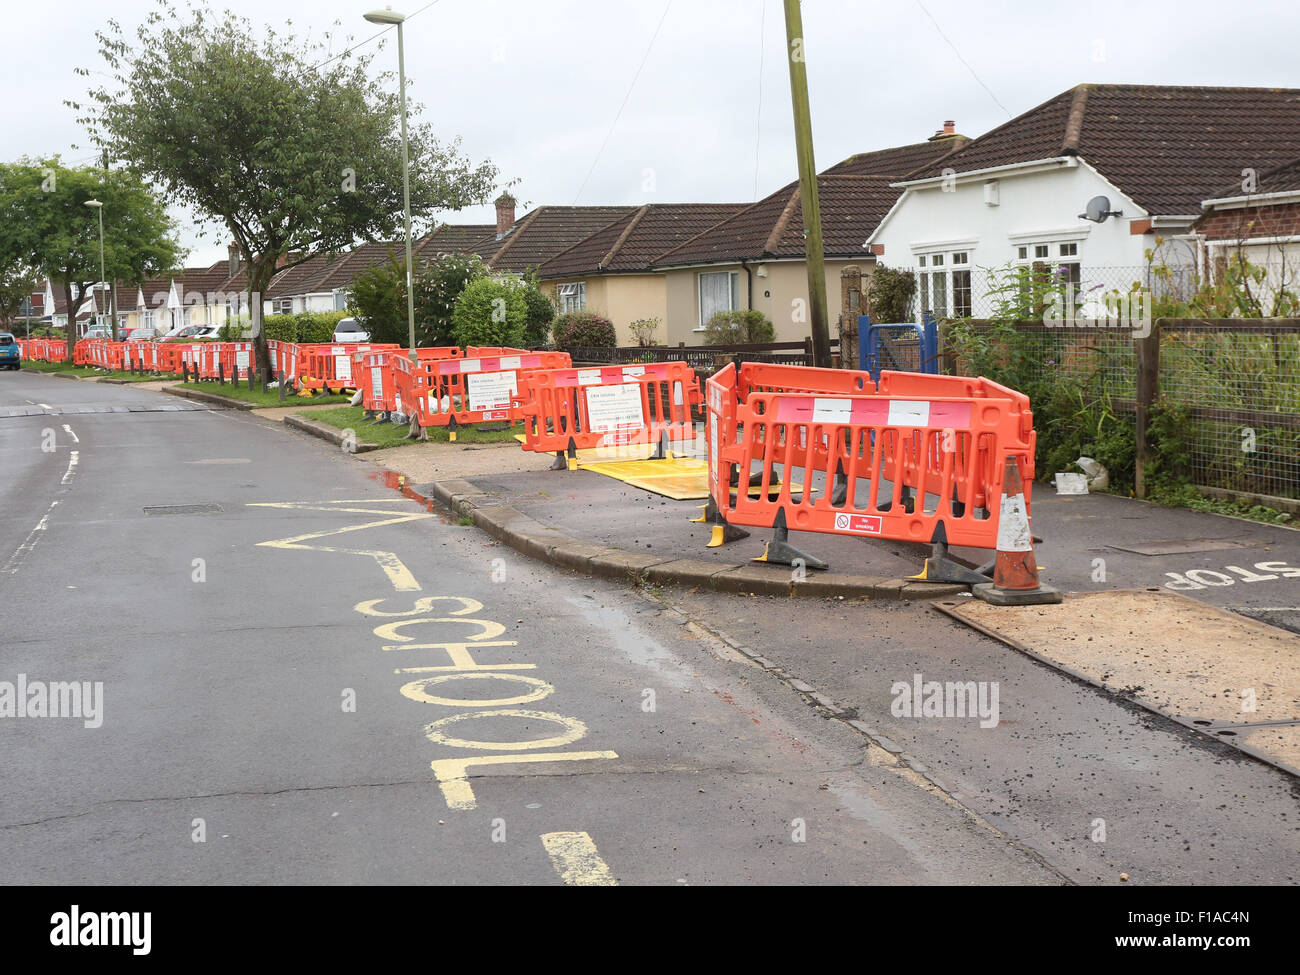 Bridgemary, UK. 31st August, 2015. Gas Works outside  Bedhenham Road Bridgemary  residents were enraged this week after a three-month gas  main replacement project began outside a primary school in the first week of term.  Southern Gas Network contractors where  due to begin the project in Bridgemary on August 7, but delays meant the road did not start to be dug up until August 20   The scheme has been installing new gas main from Bramer Road to  the junction of the Bridgemary Avenue  close to The Bedenham Primary School. Credit: UKNIP / Alamy Live News Stock Photo